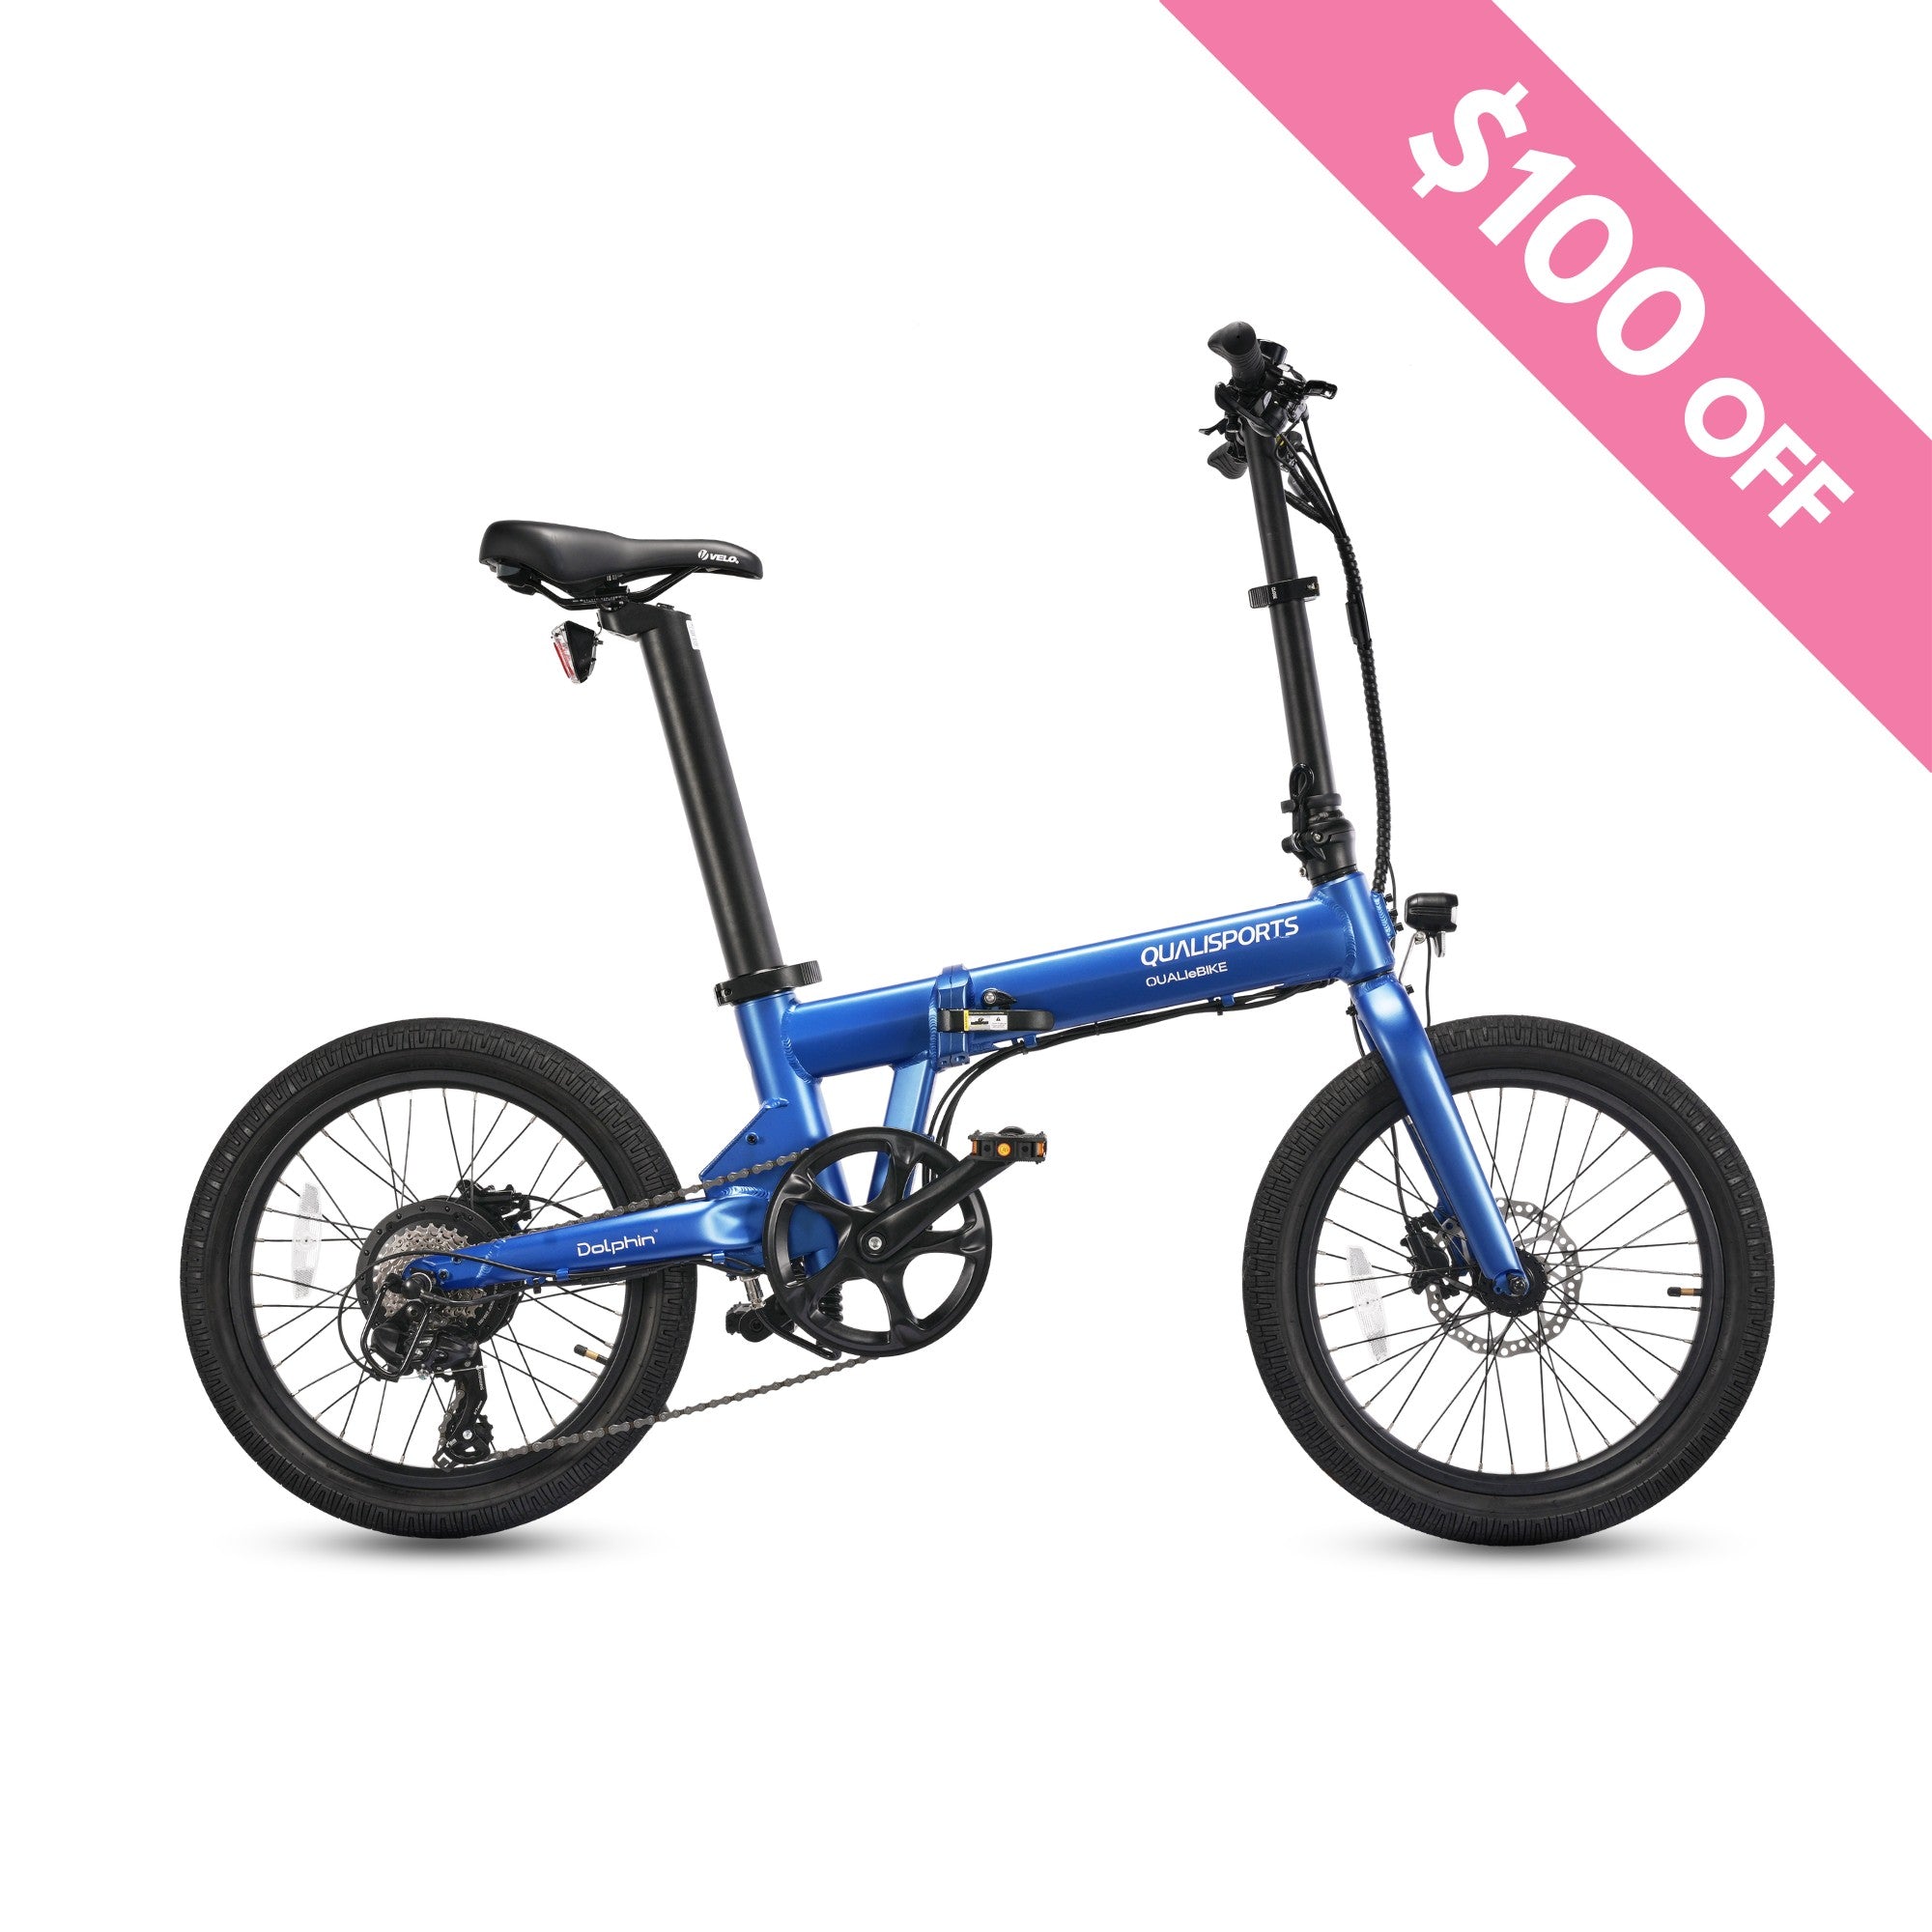 A blue folding DOLPHIN STD/PLUS electric bike with black tires is displayed on a white background. A pink diagonal banner in the top right corner reads "$100 OFF" in white text. The e-bike, branded "Qualisports USA," features a powerful 500w motor for a long-range ride.